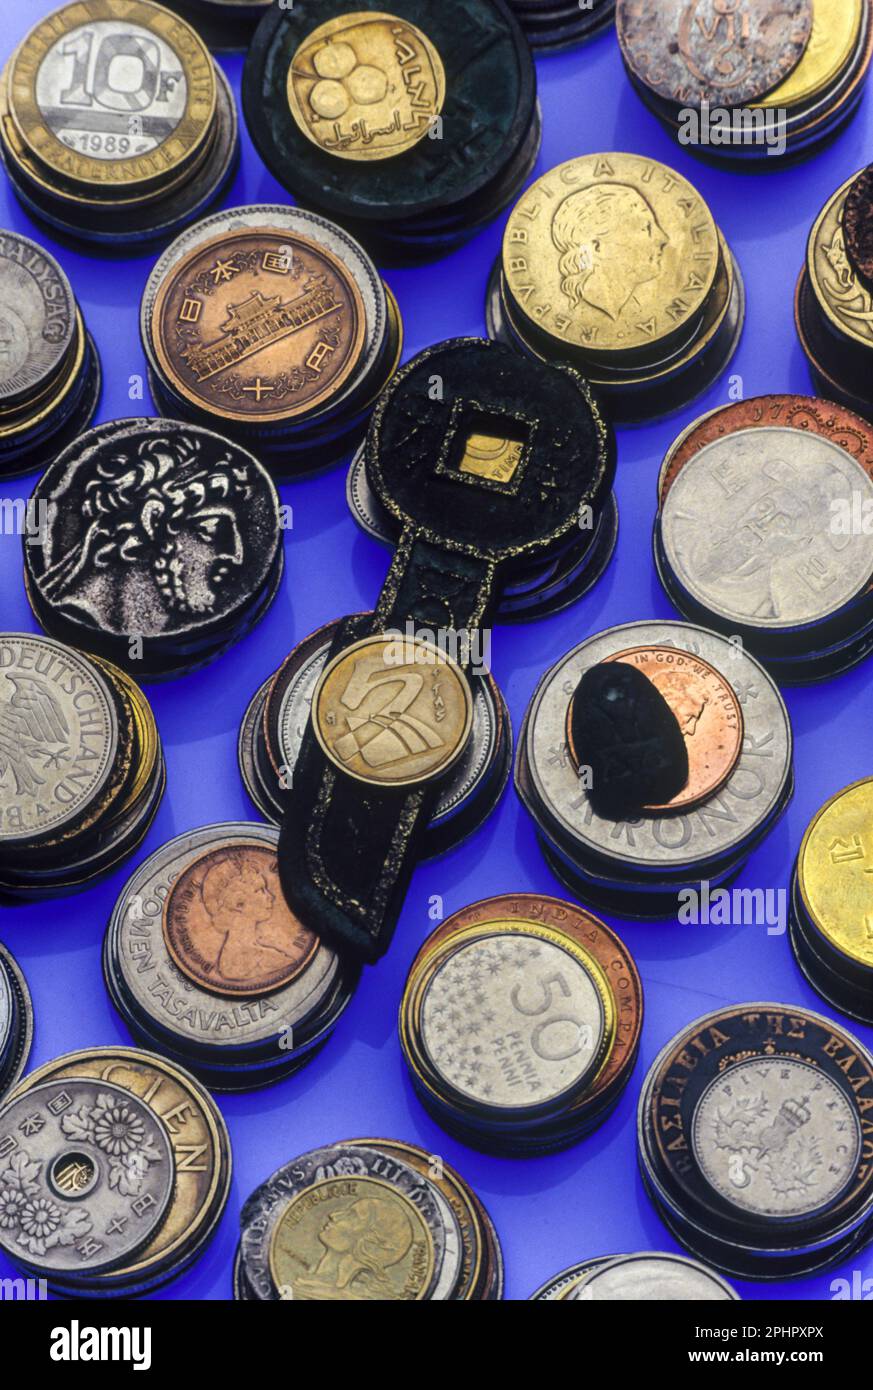 PILES OF OLD NATIONAL AND HISTORIC COINS Stock Photo